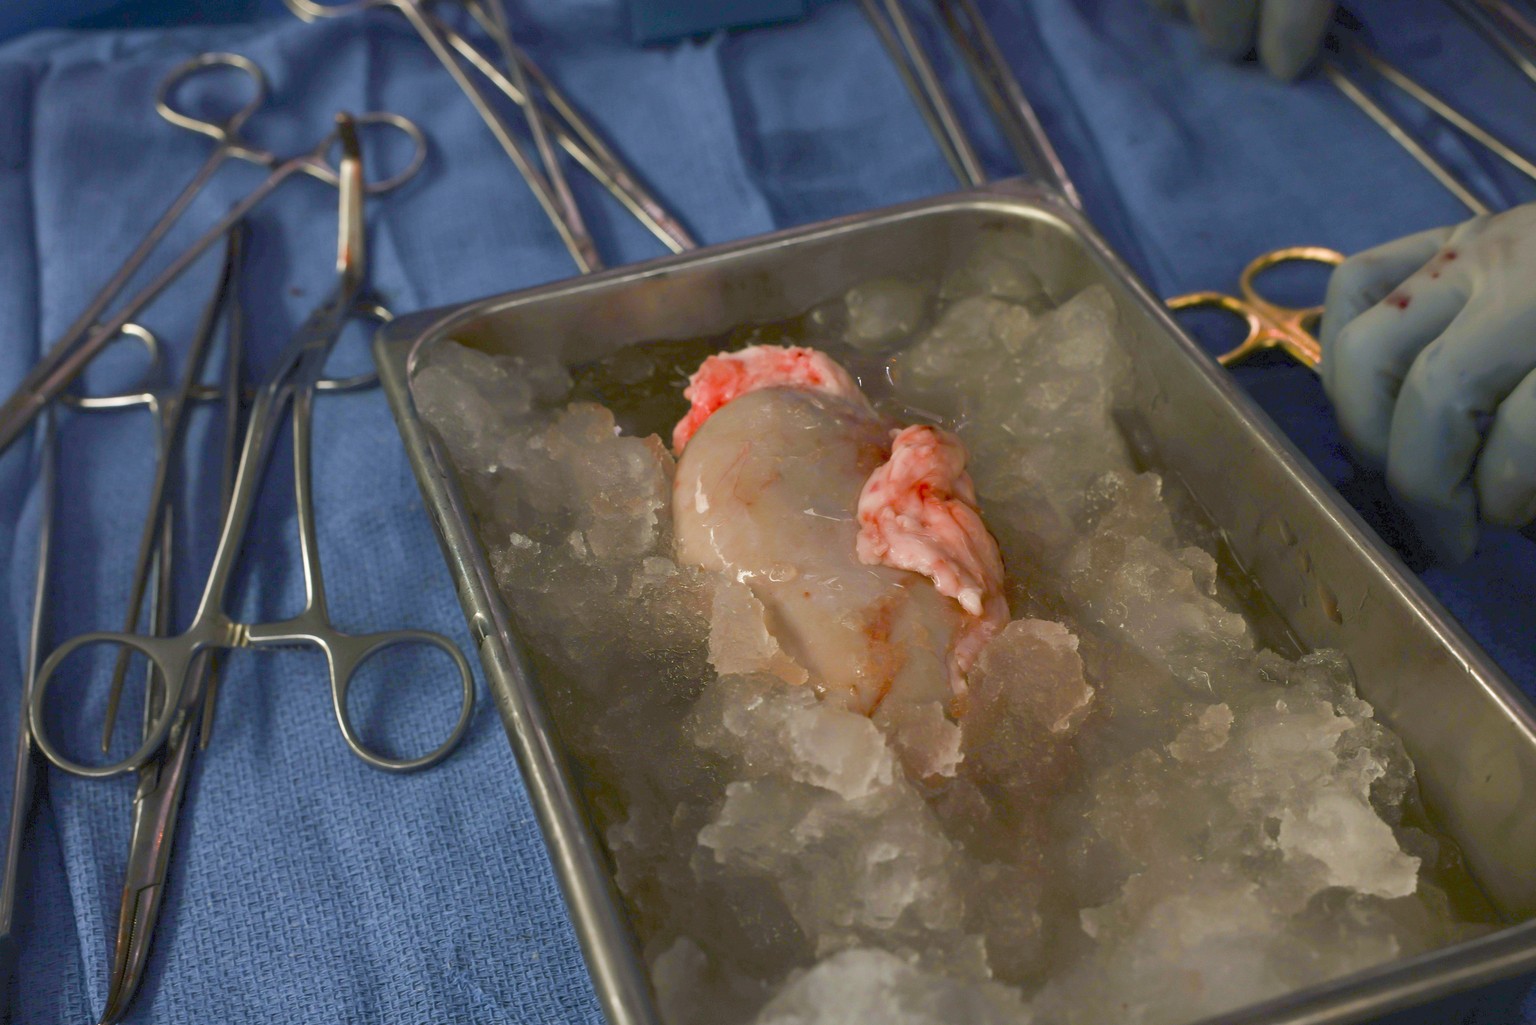 A pig kidney sits on ice, awaiting transplantation into a living human at Massachusetts General Hospital, Saturday, March 16, 2024, in Boston, Mass. (Massachusetts General Hospital via AP)